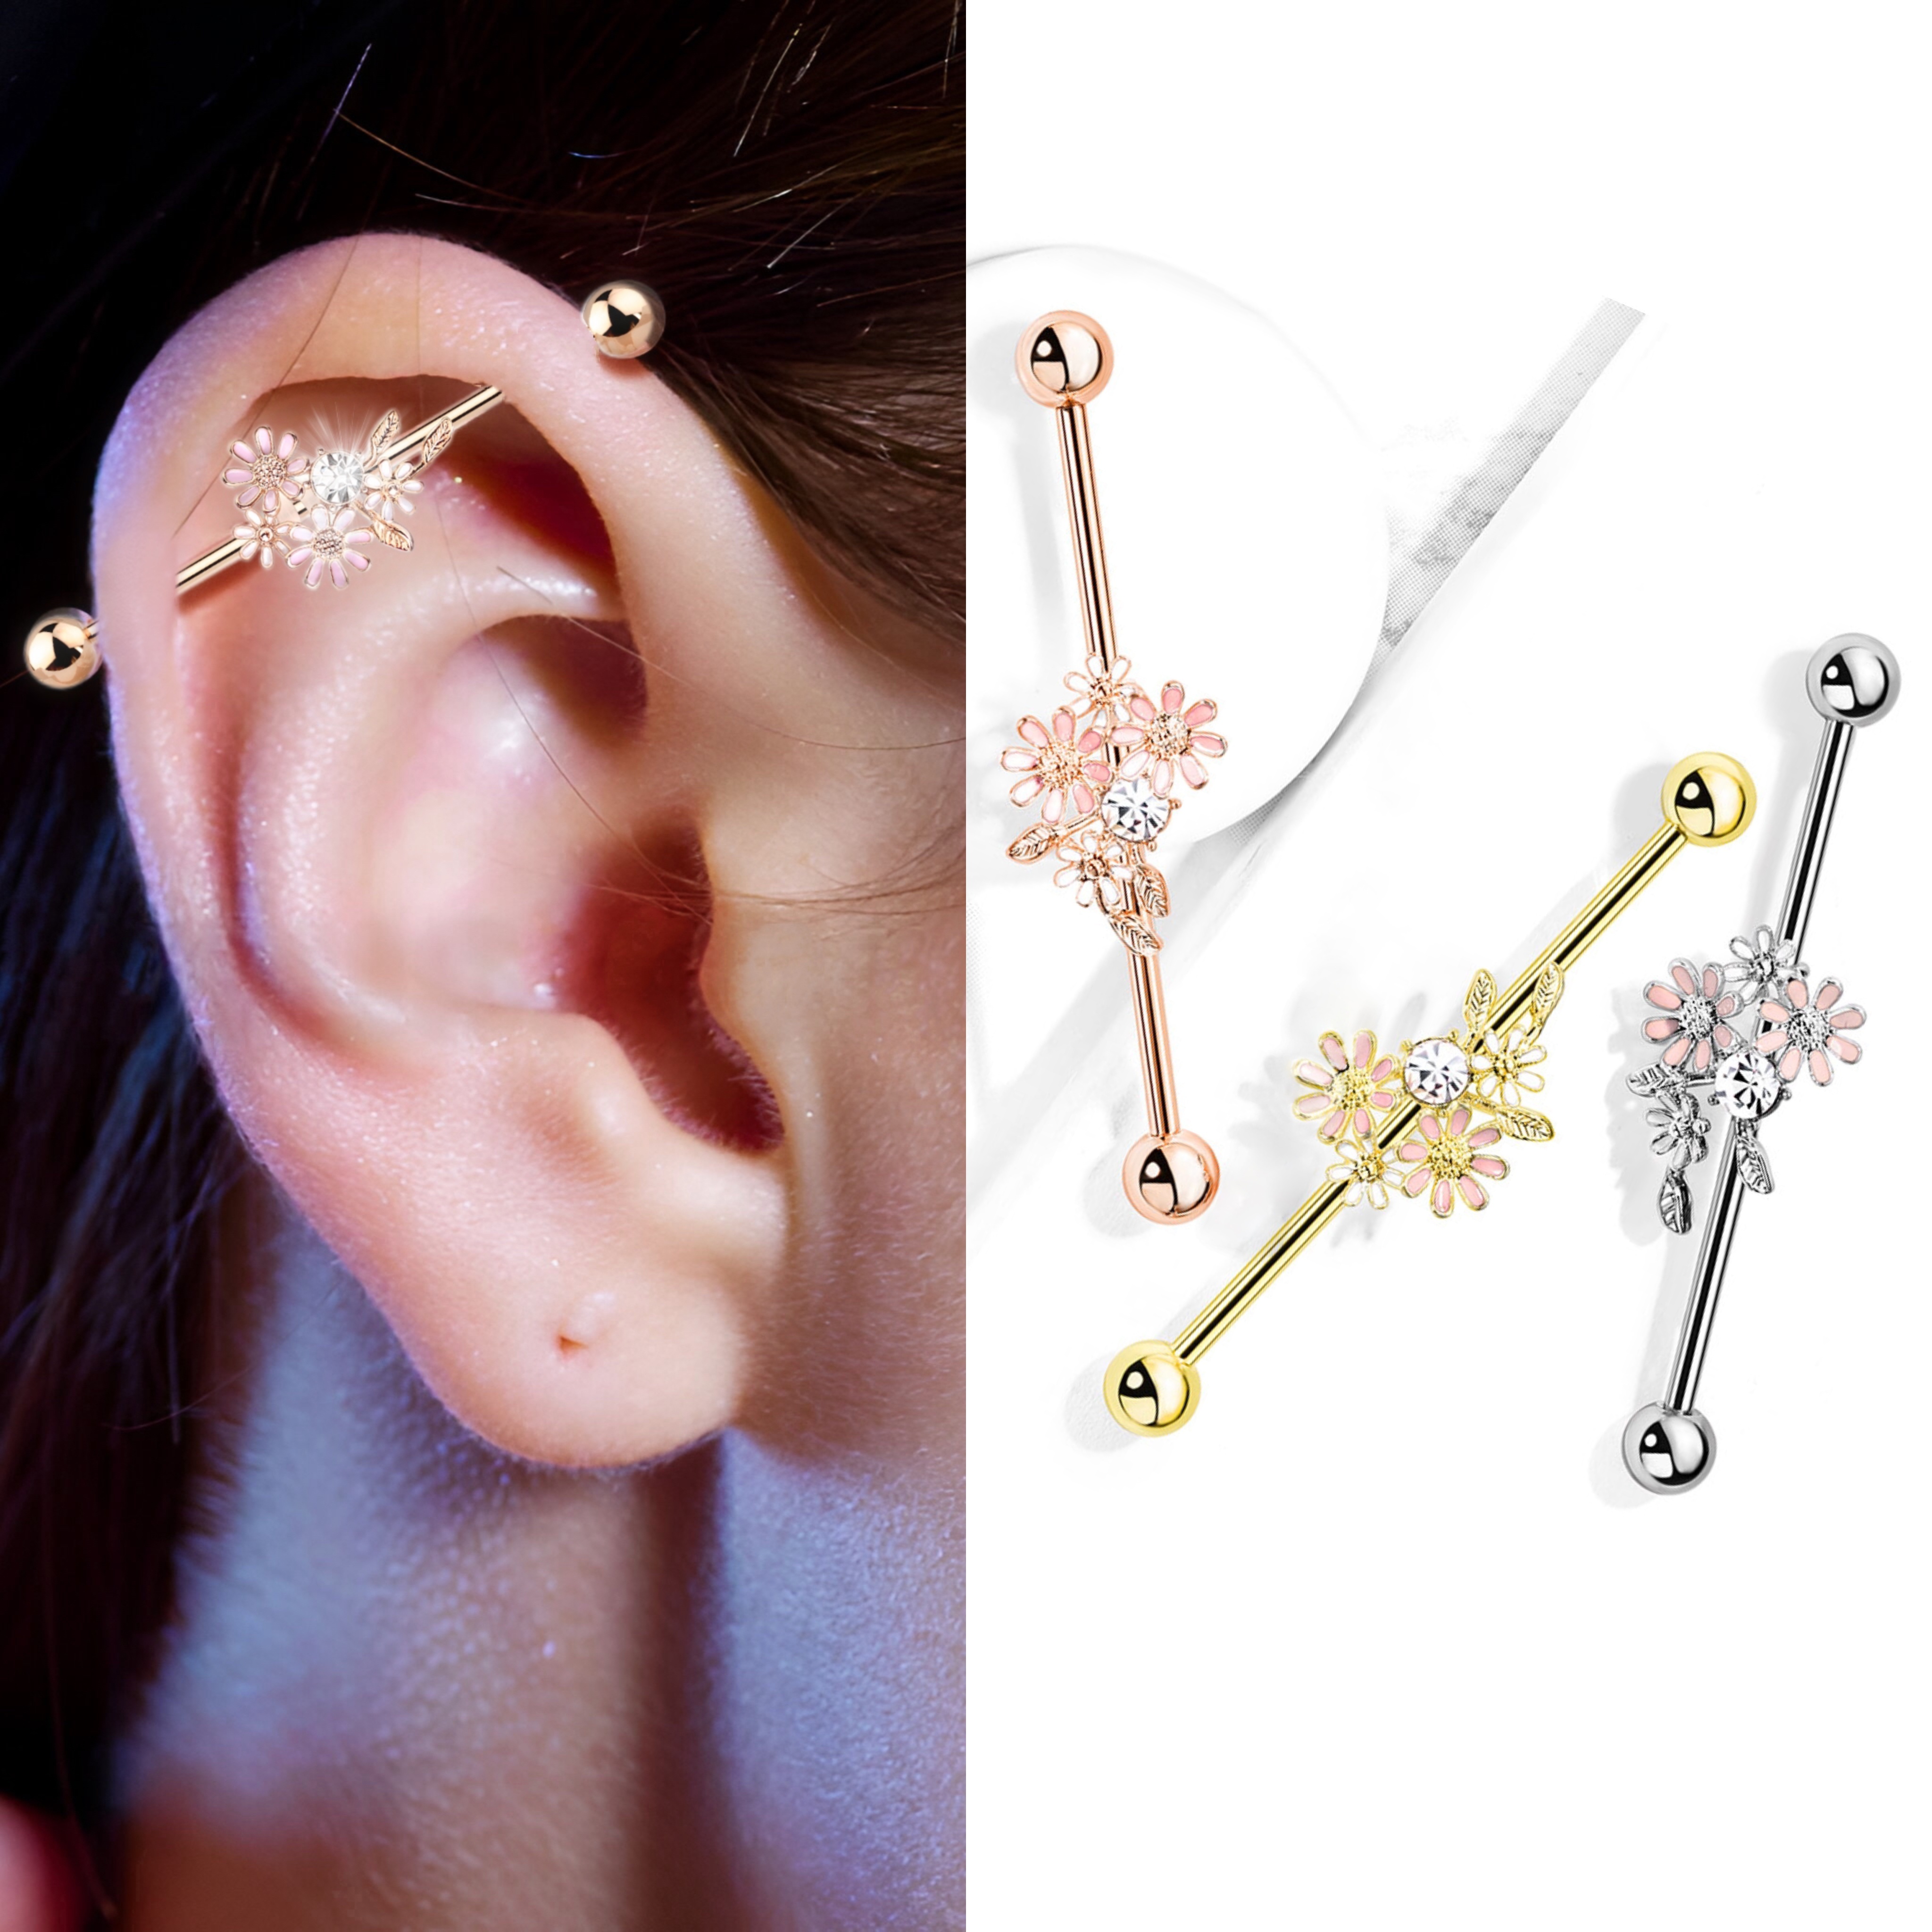 

1pc Stainless Steel Industrial Barbell With Flower & Faux Gem Design, Body Piercing Jewelry, Romantic Summer Style Ear Cartilage Earring For Daily Wear, Sexy & Cute Date Gift, Party Accessory